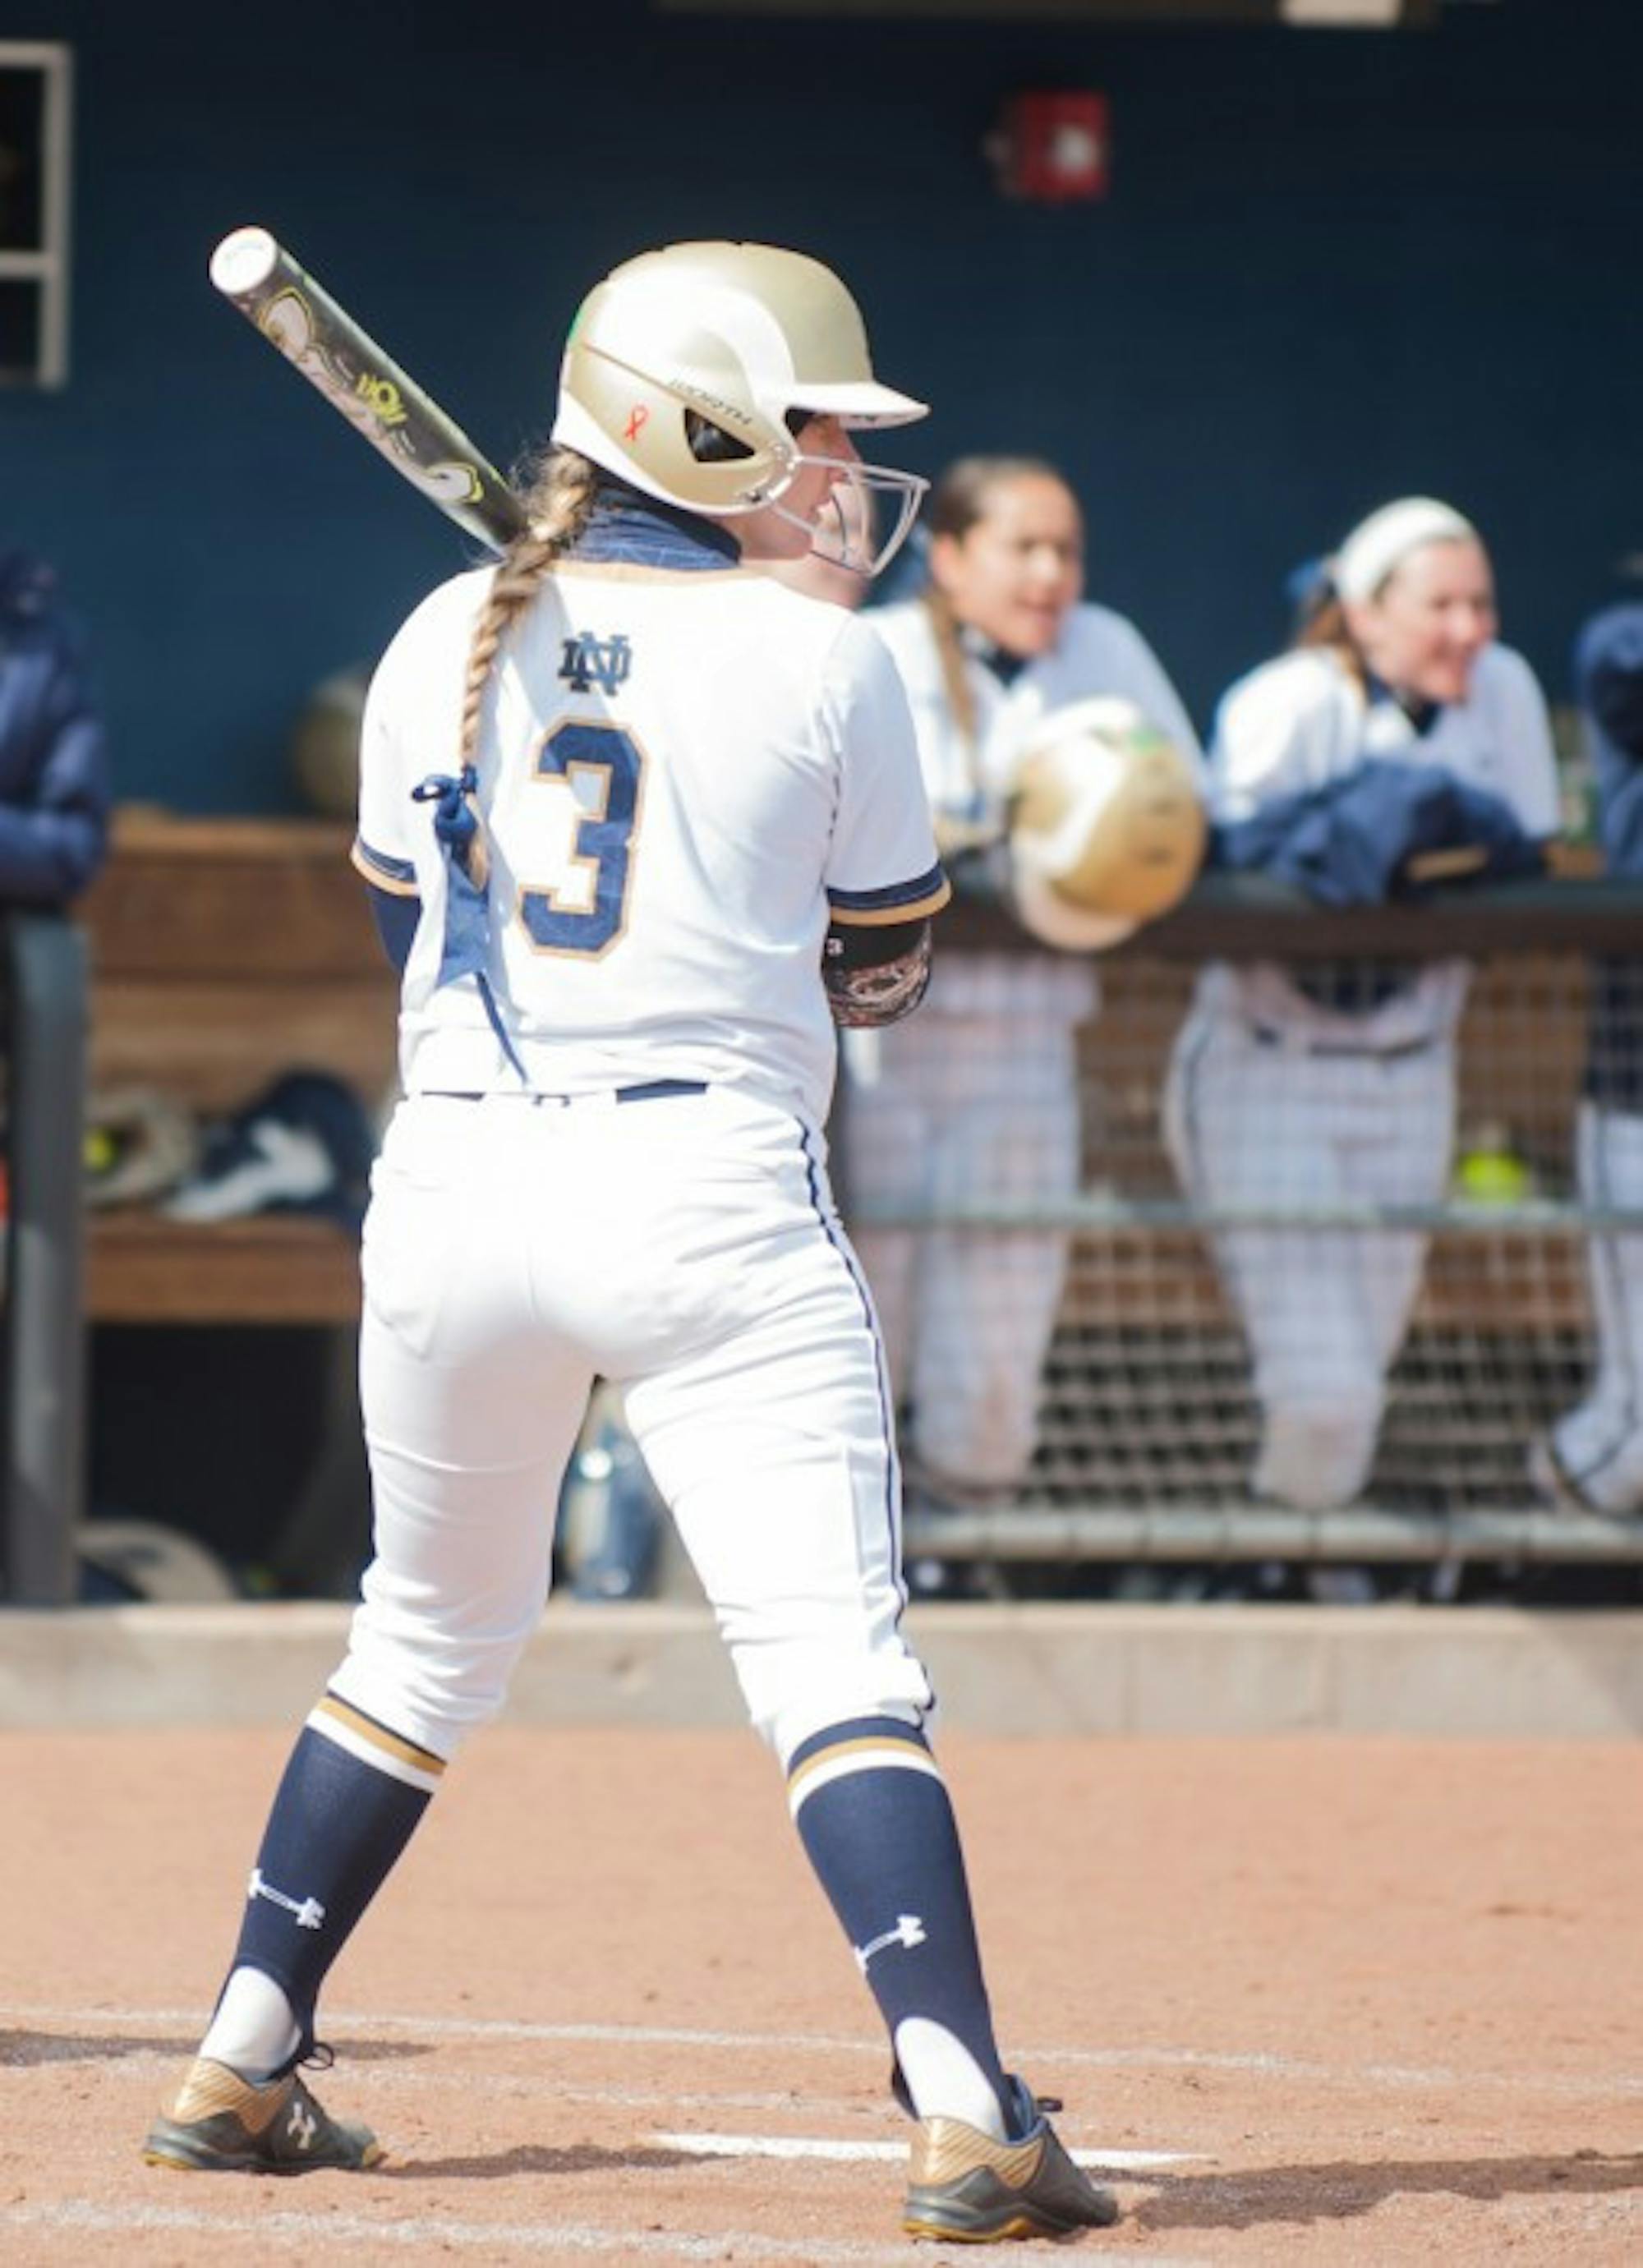 Irish senior outfielder Emilee Koerner waits for a pitch during Notre Dame’s doubleheader against Georgia Tech on March 21.